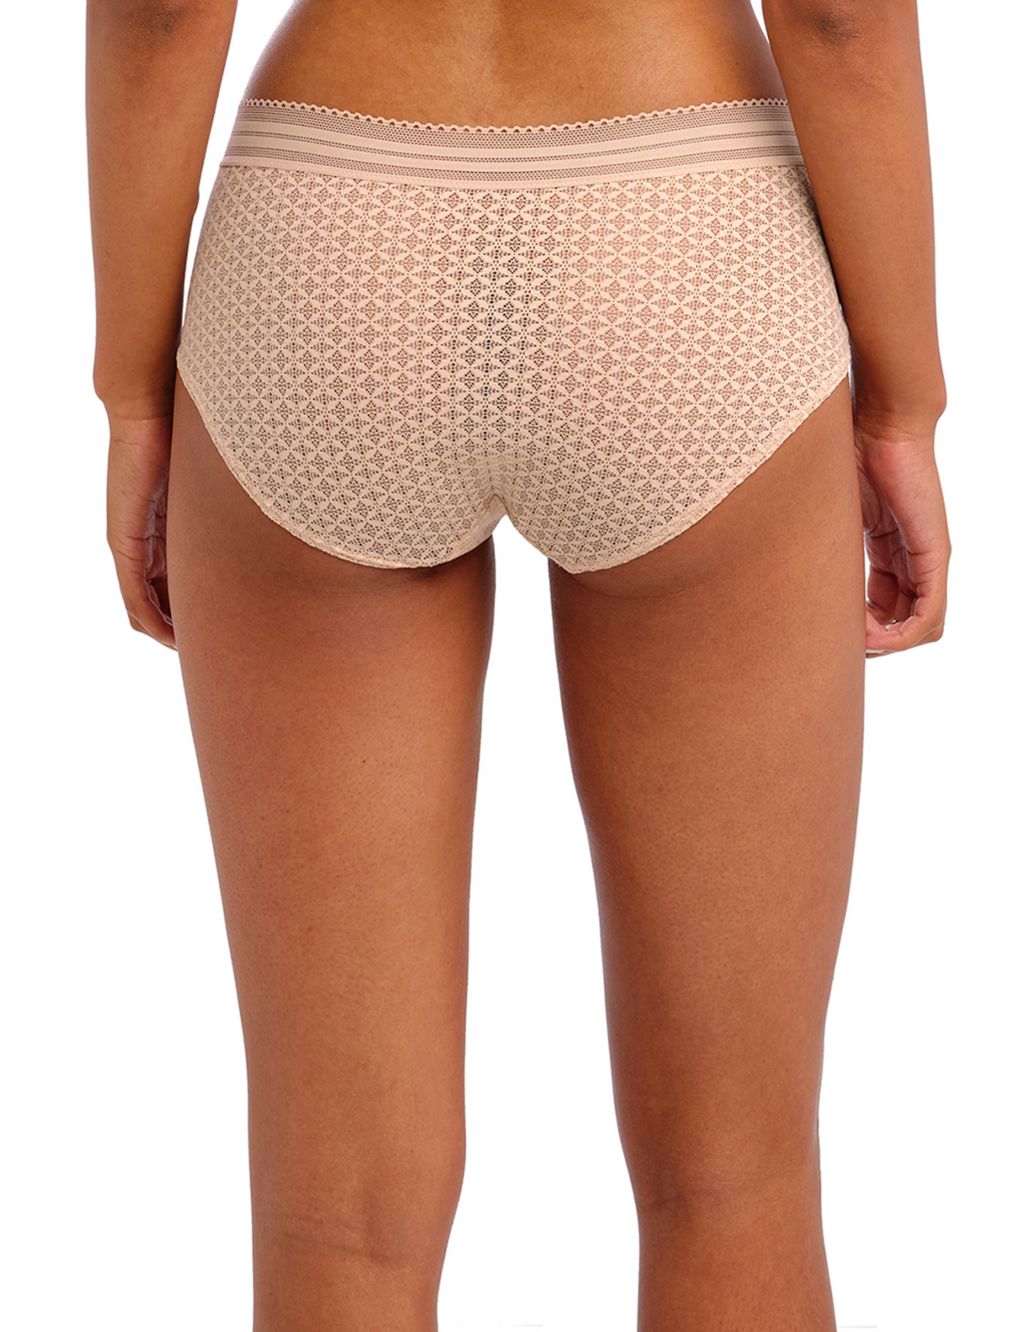 Viva All Over Lace Knicker Shorts image 4